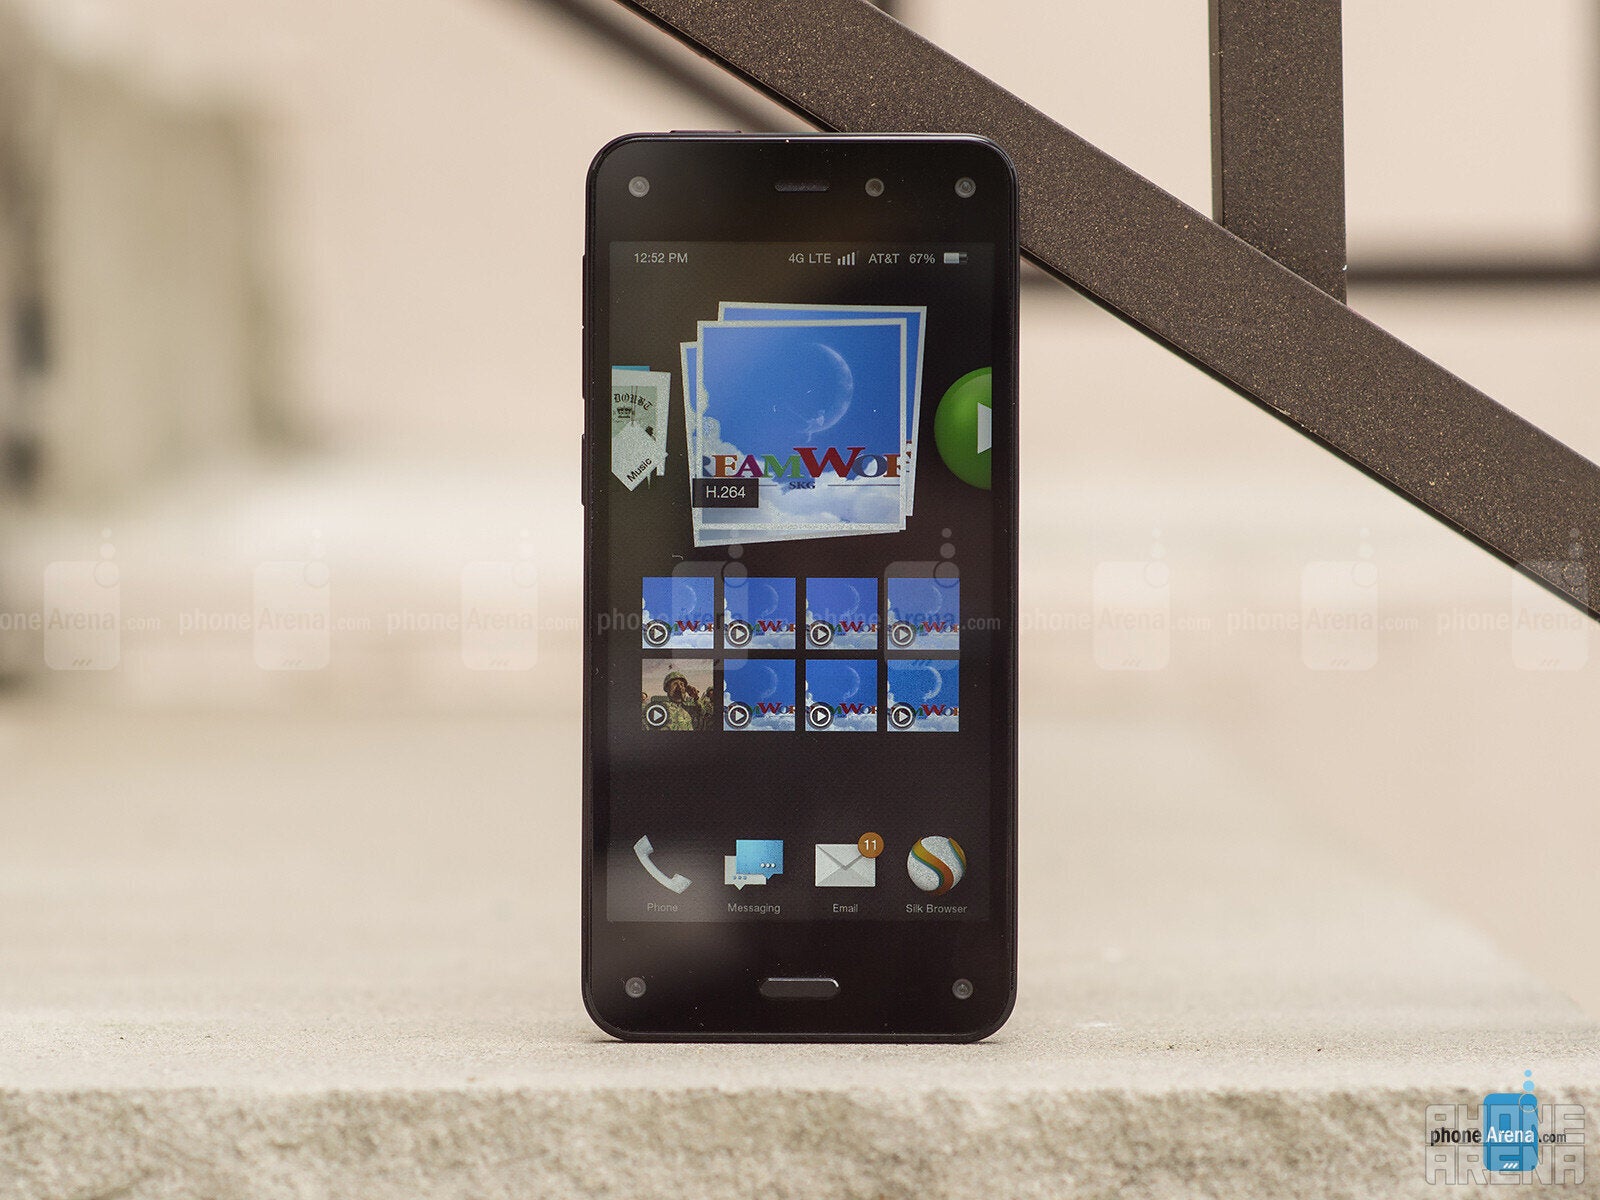 The Fire Phone is ancient history now - Amazon should go back to making smartphones already